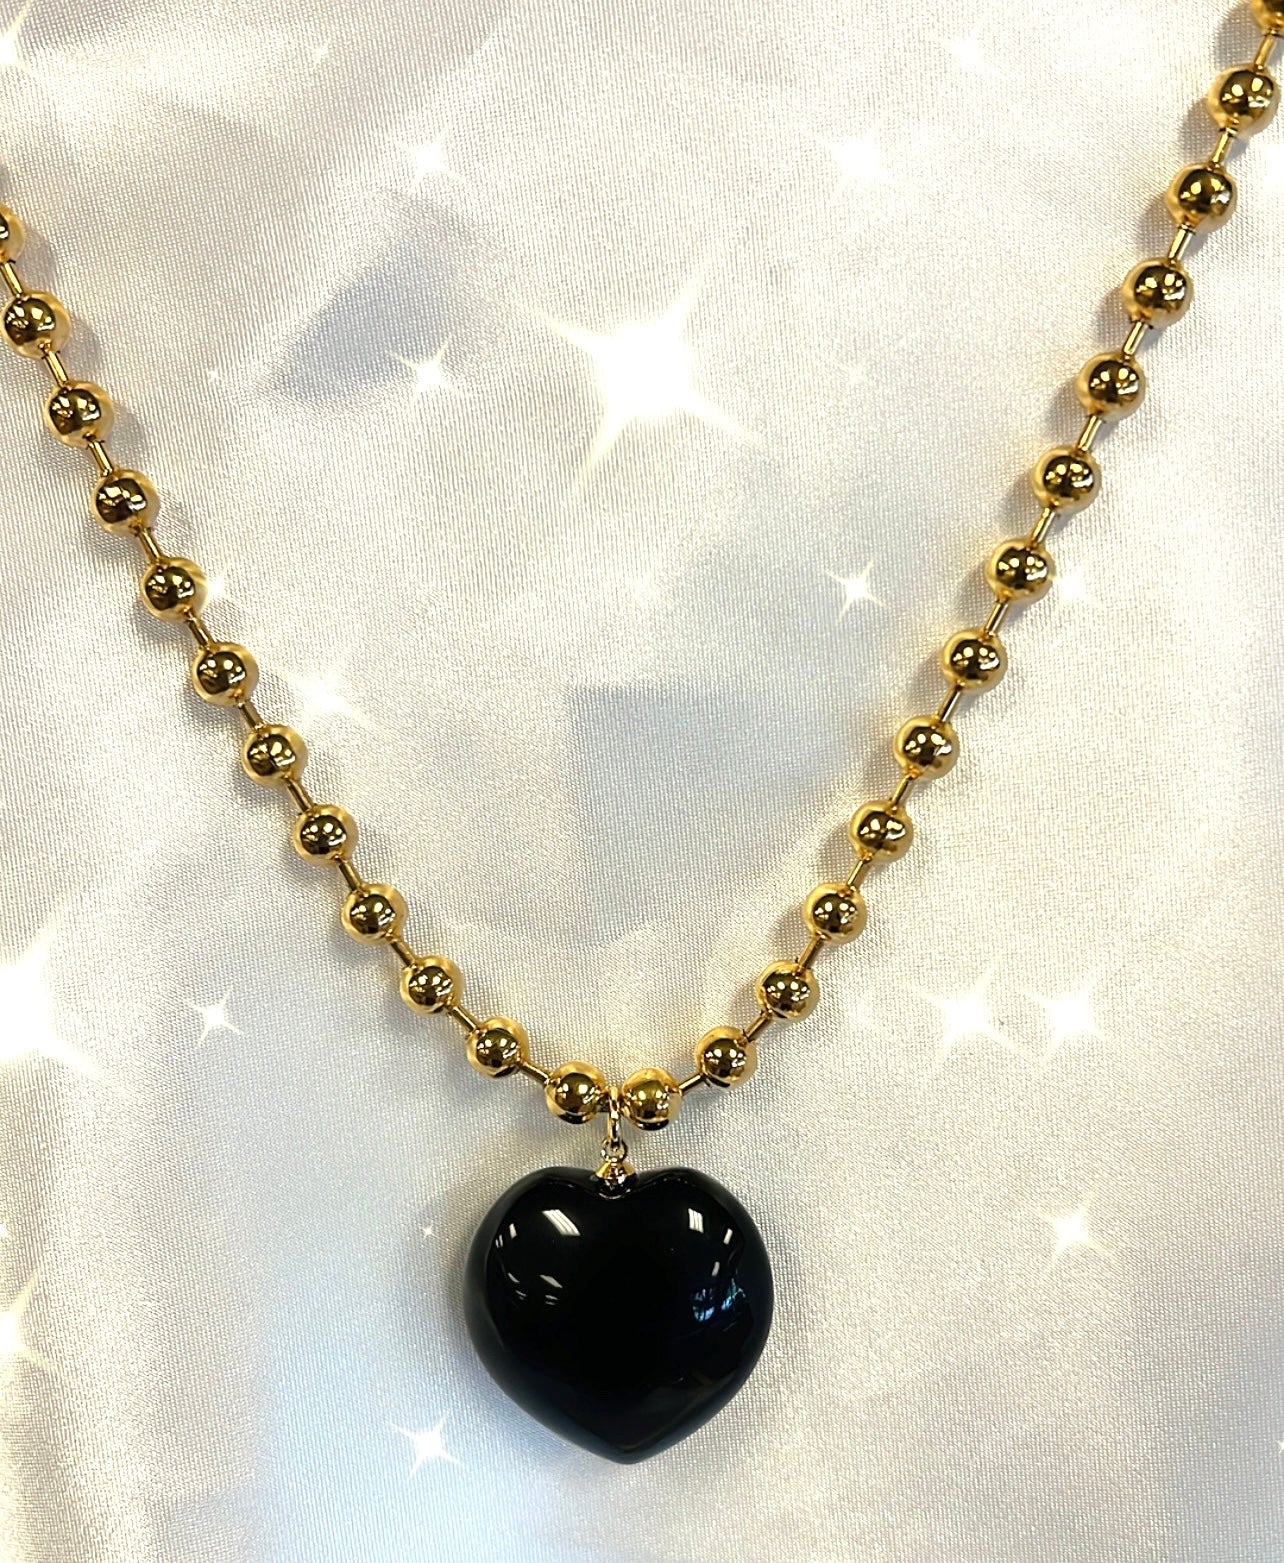 BLACK OBSIDIAN BALL CHAIN HEART NECKLACE-purification, fulfillment, new beginnings, outer manifestation